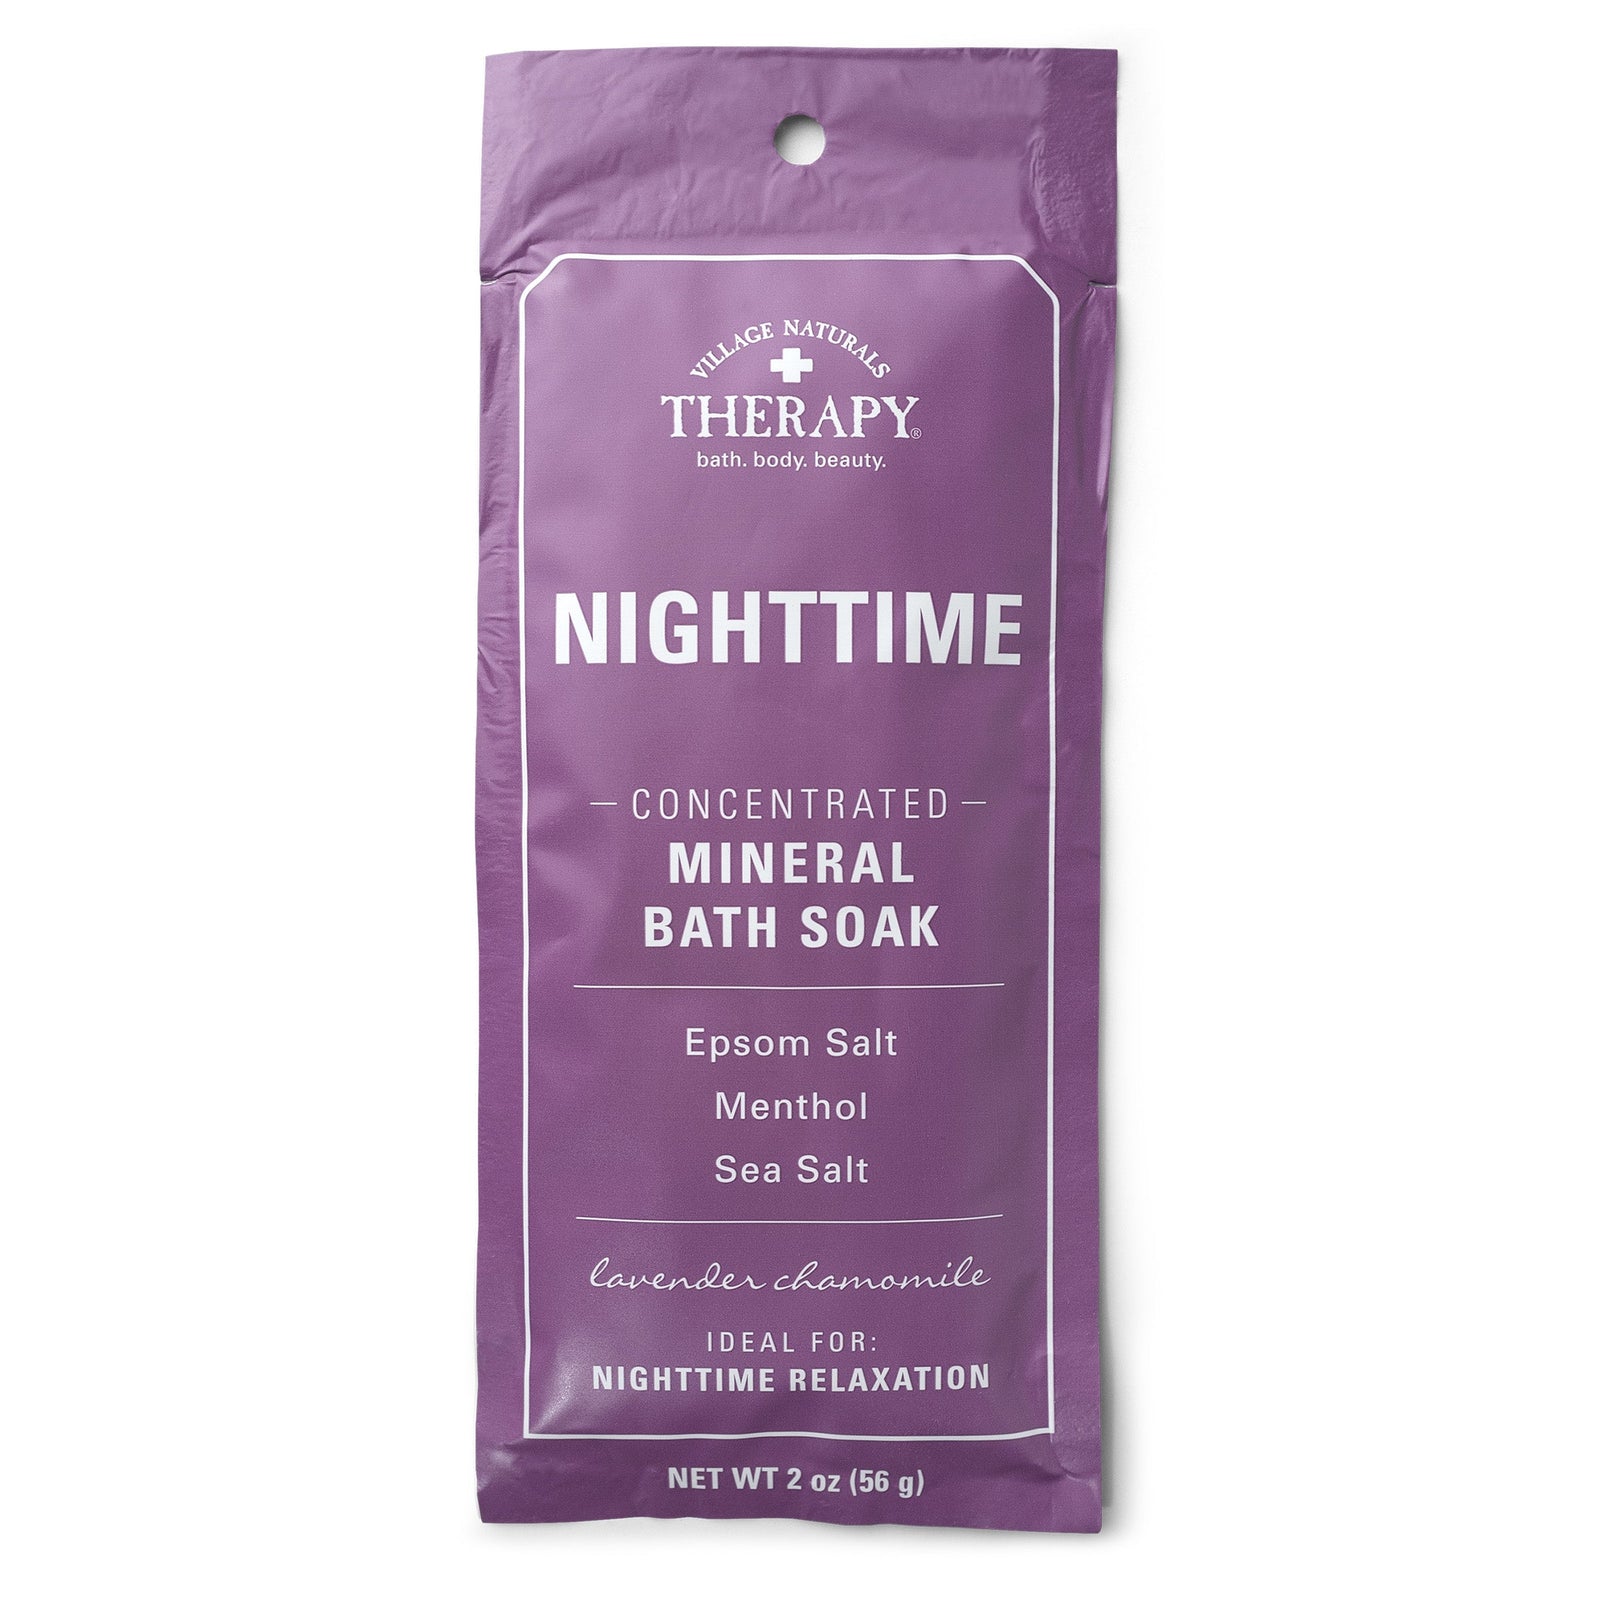 Village Naturals Therapy Nighttime Concentrated Mineral Bath Soak